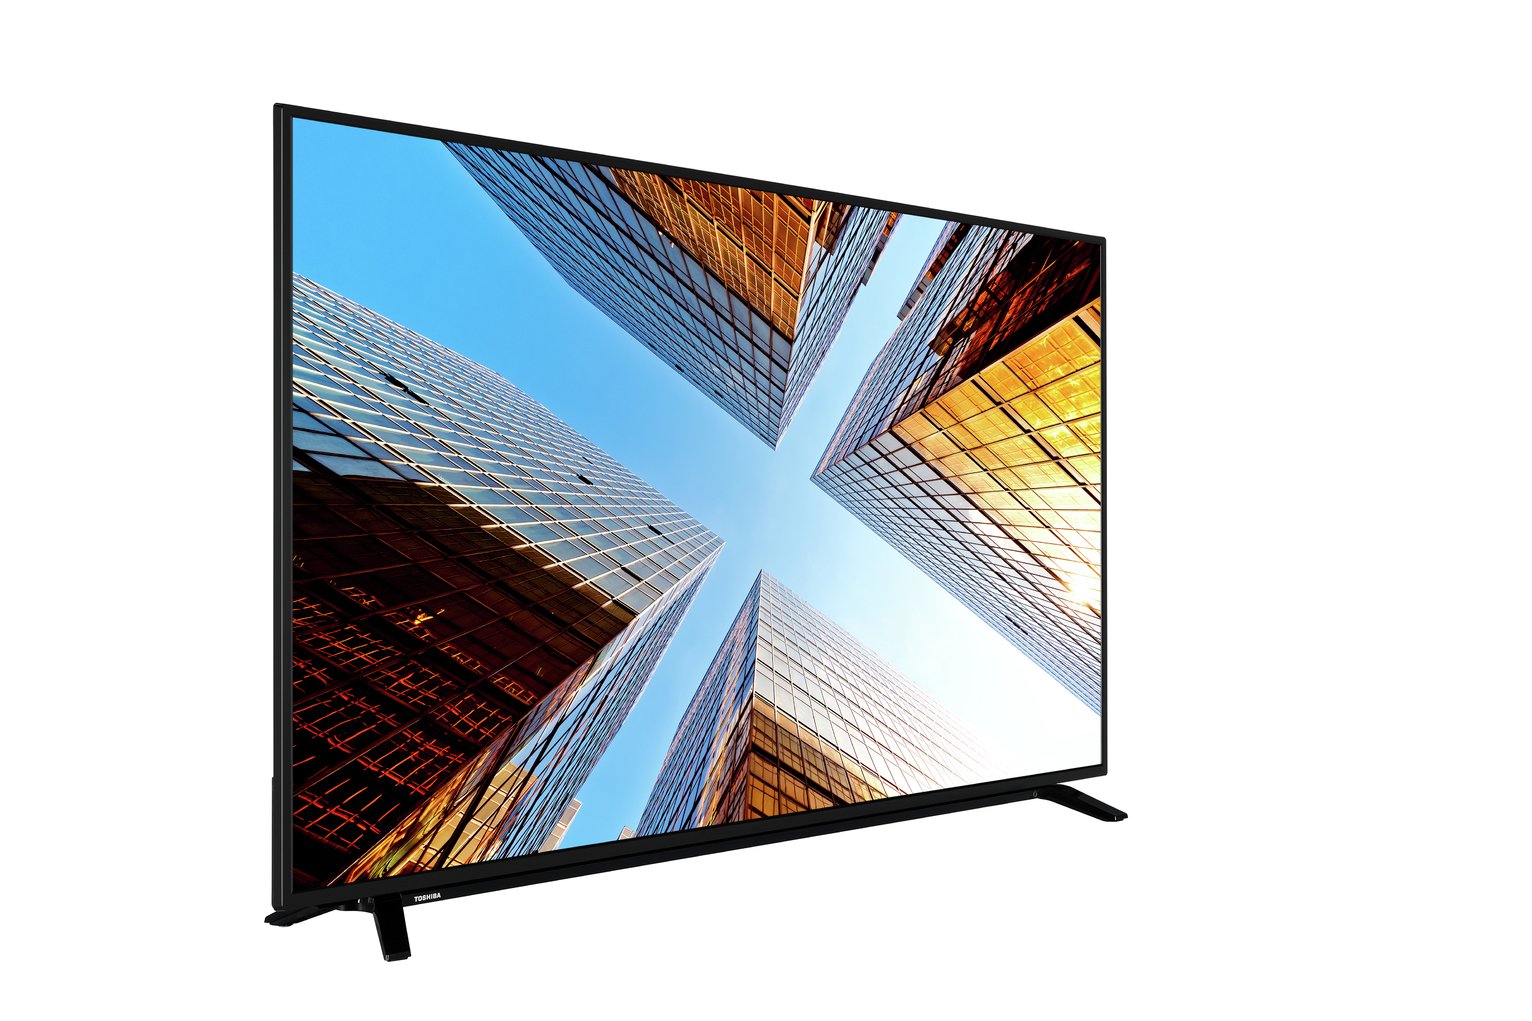 Toshiba 65 Inch Smart 4K Ultra HD LED TV with HDR Review